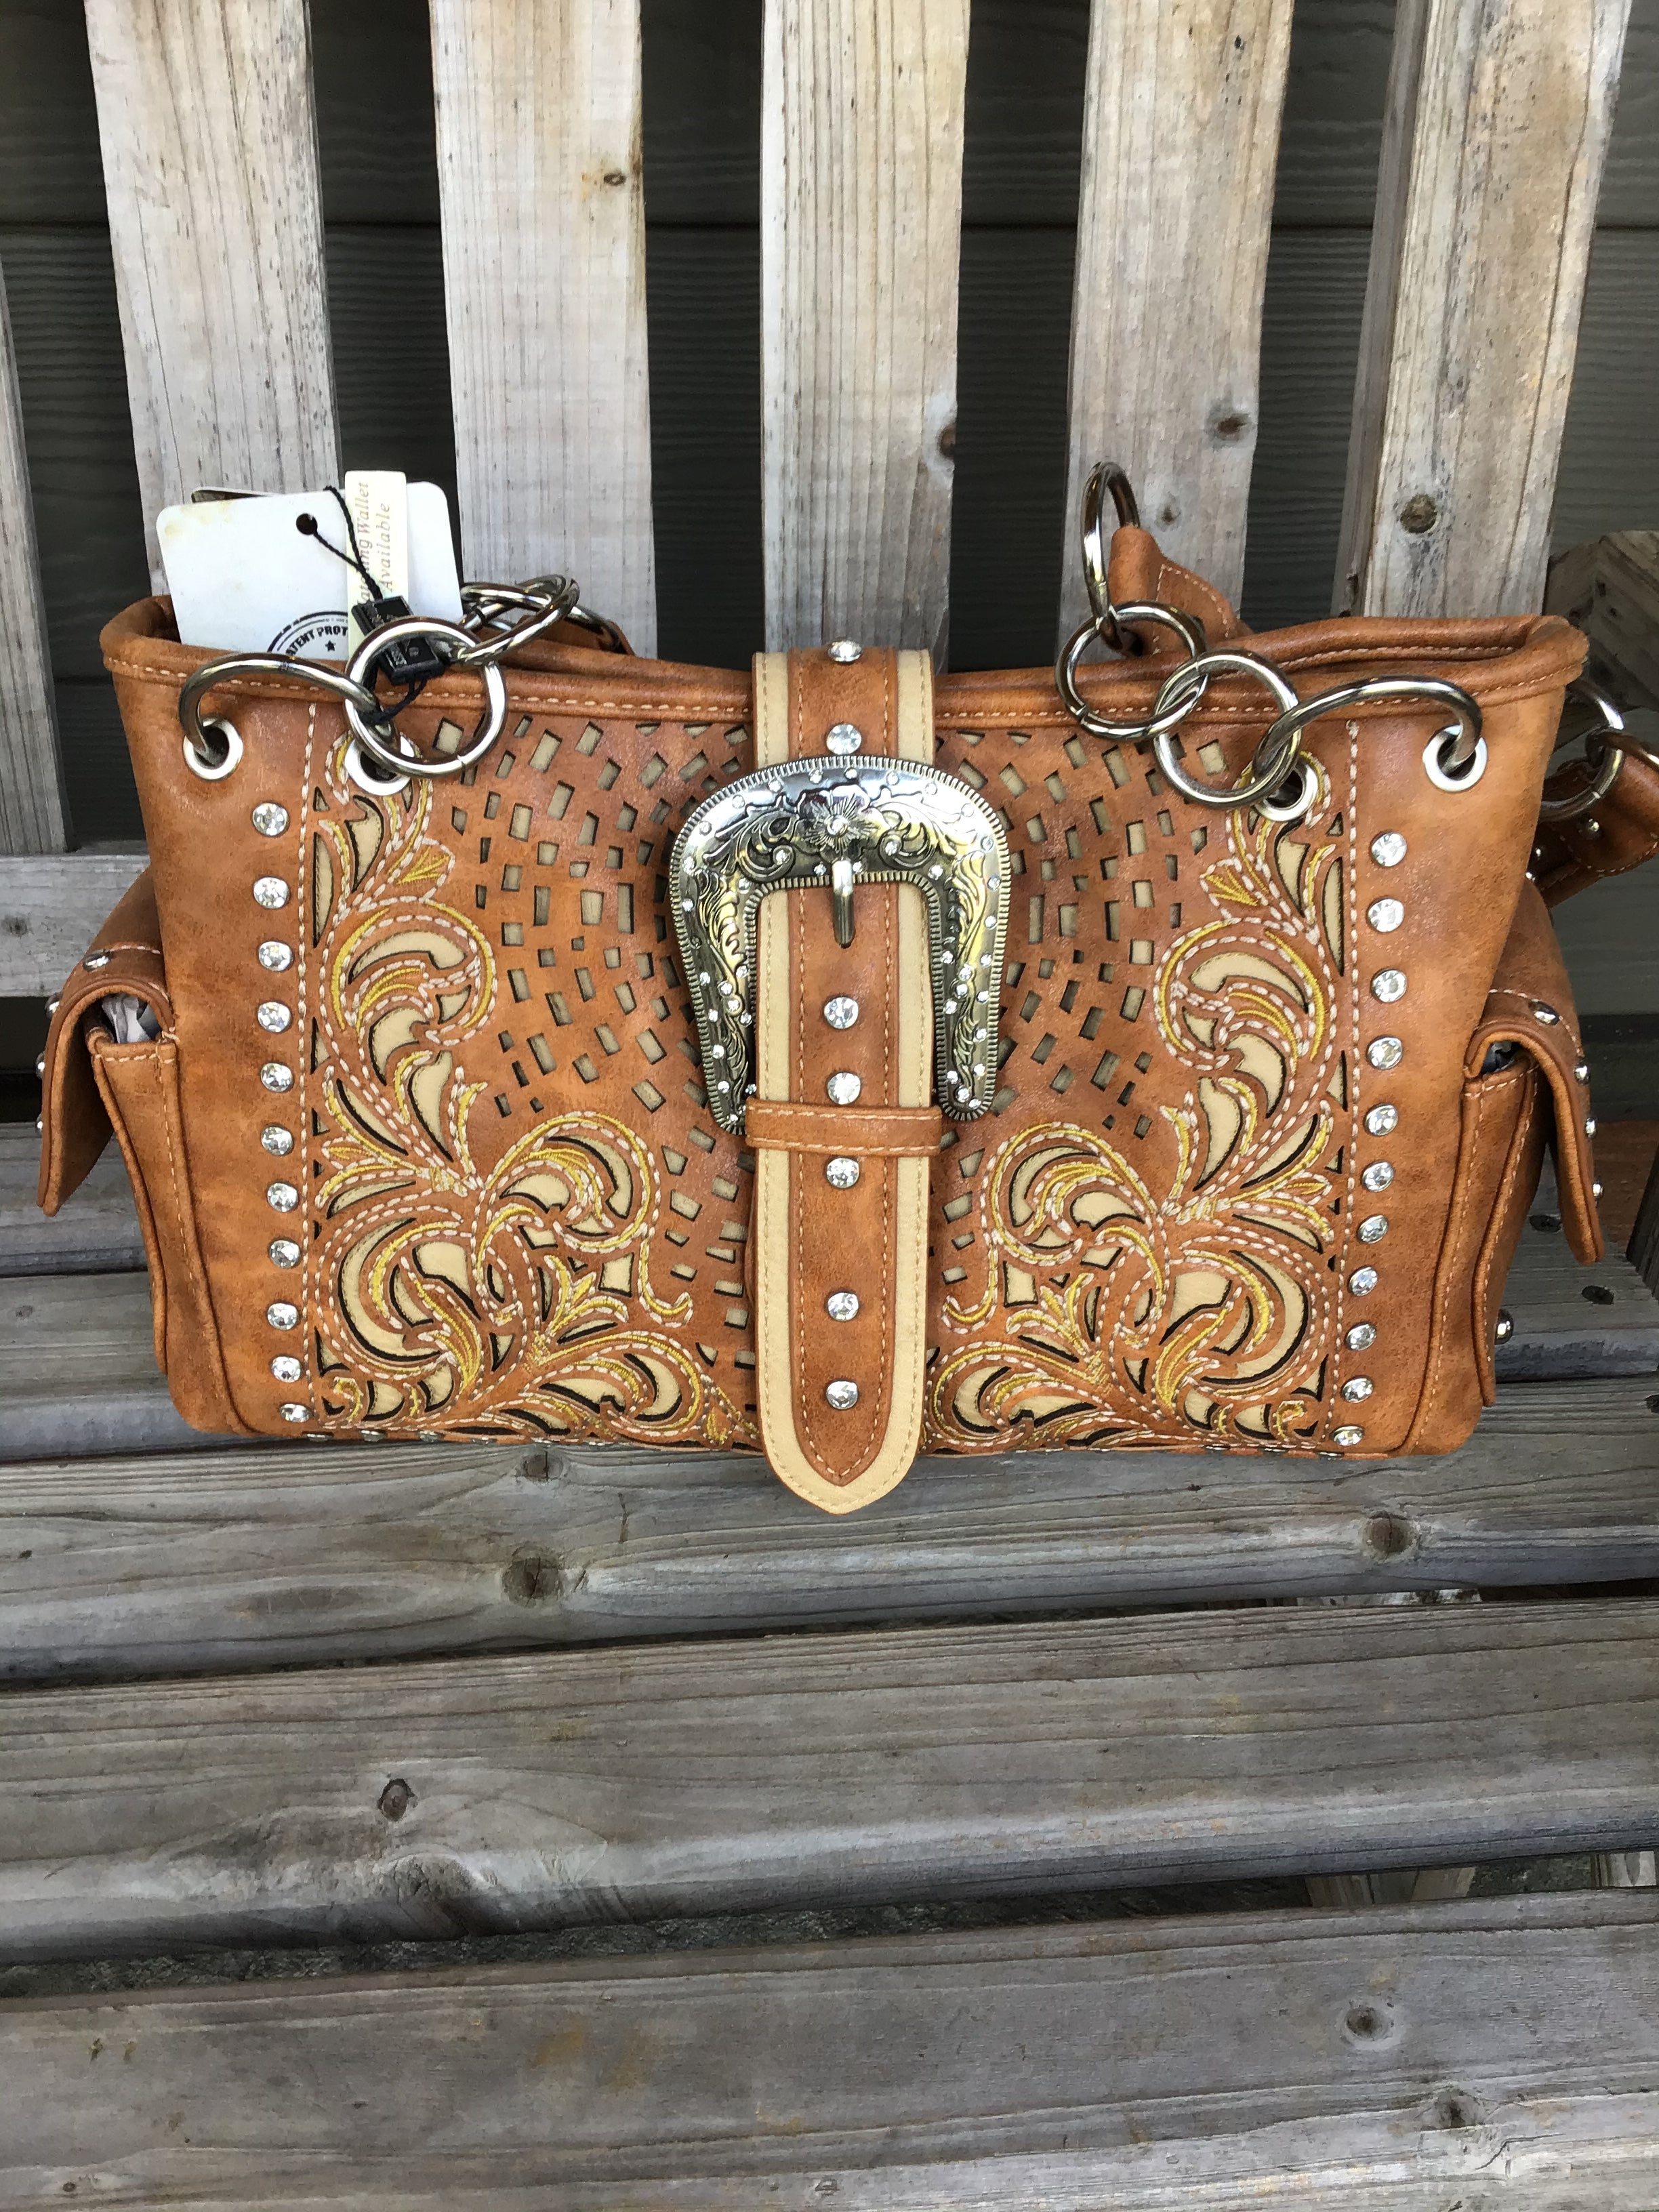 Western Handbag Buckle Collection Concealed Carry Shoulder/Crossbody Tan or Sage green in stock